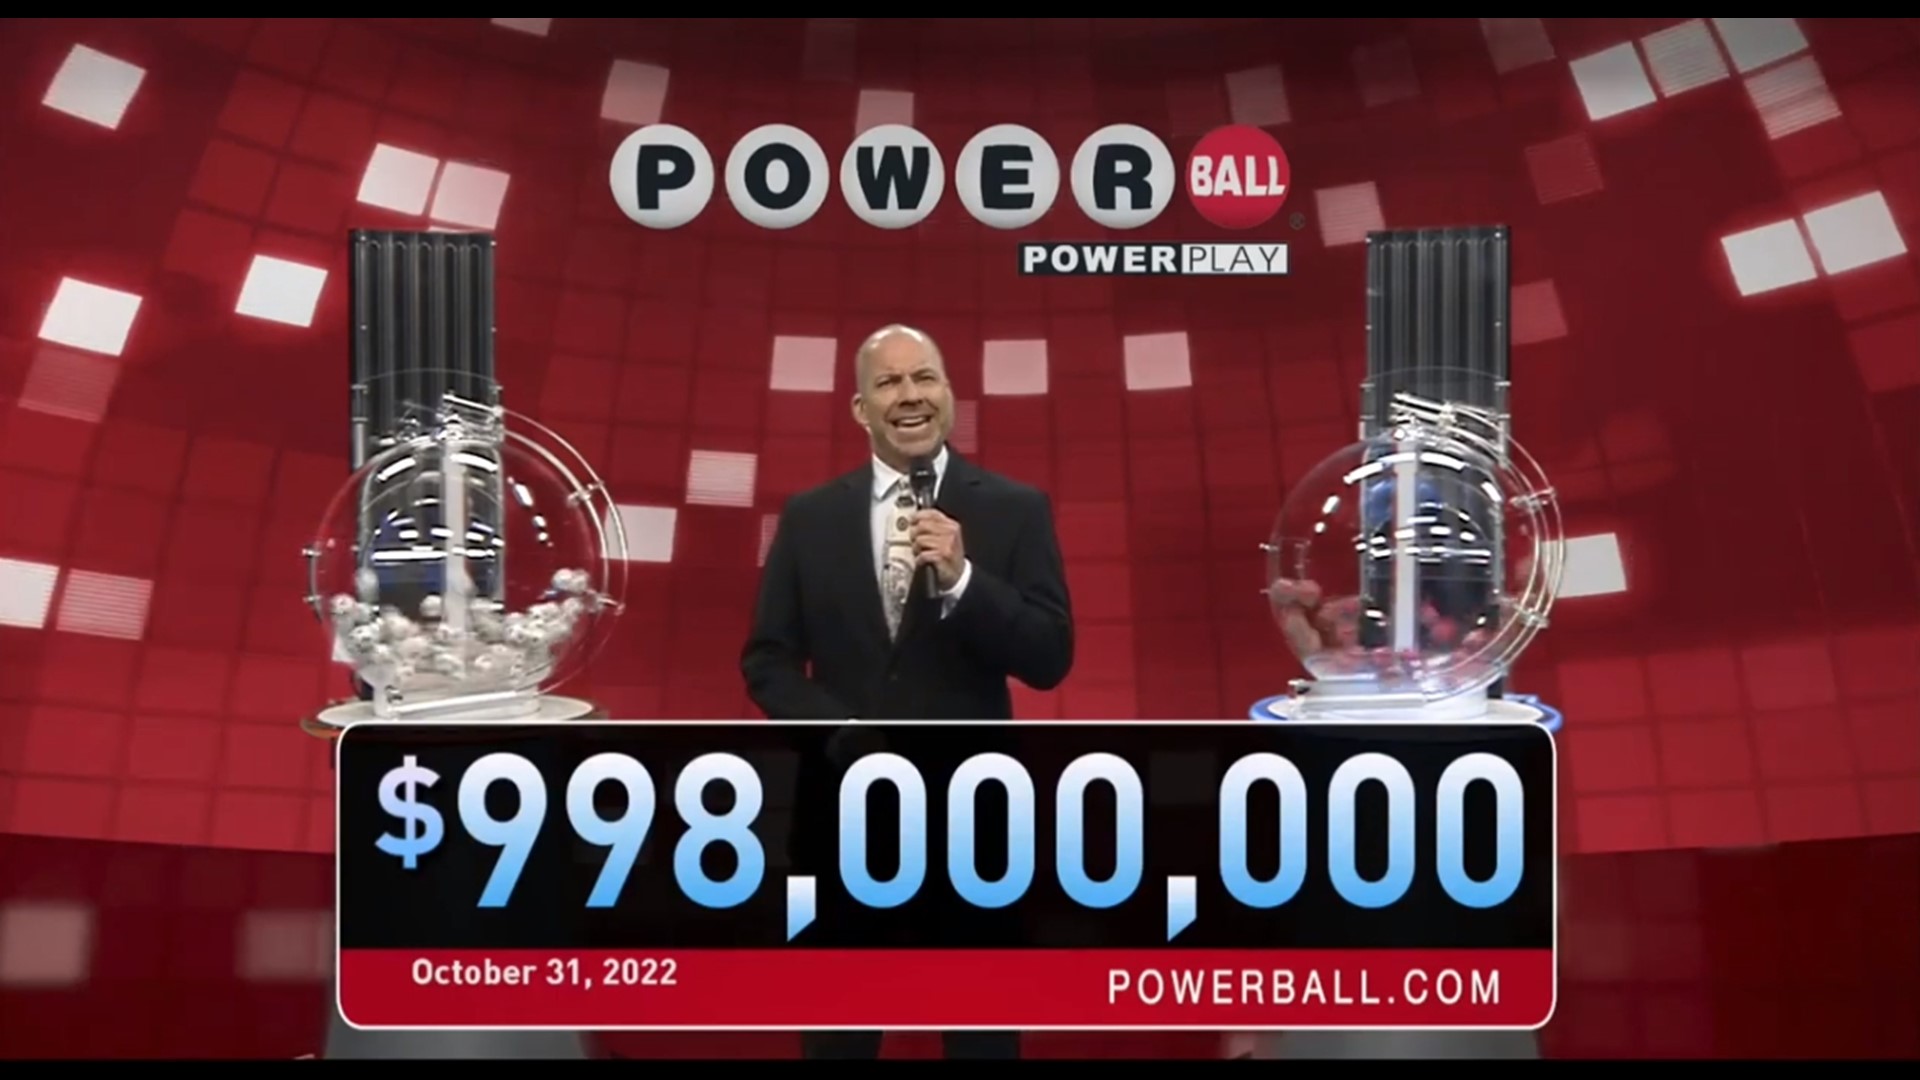 Here are the winning Powerball numbers for Friday, October 31, 2022.